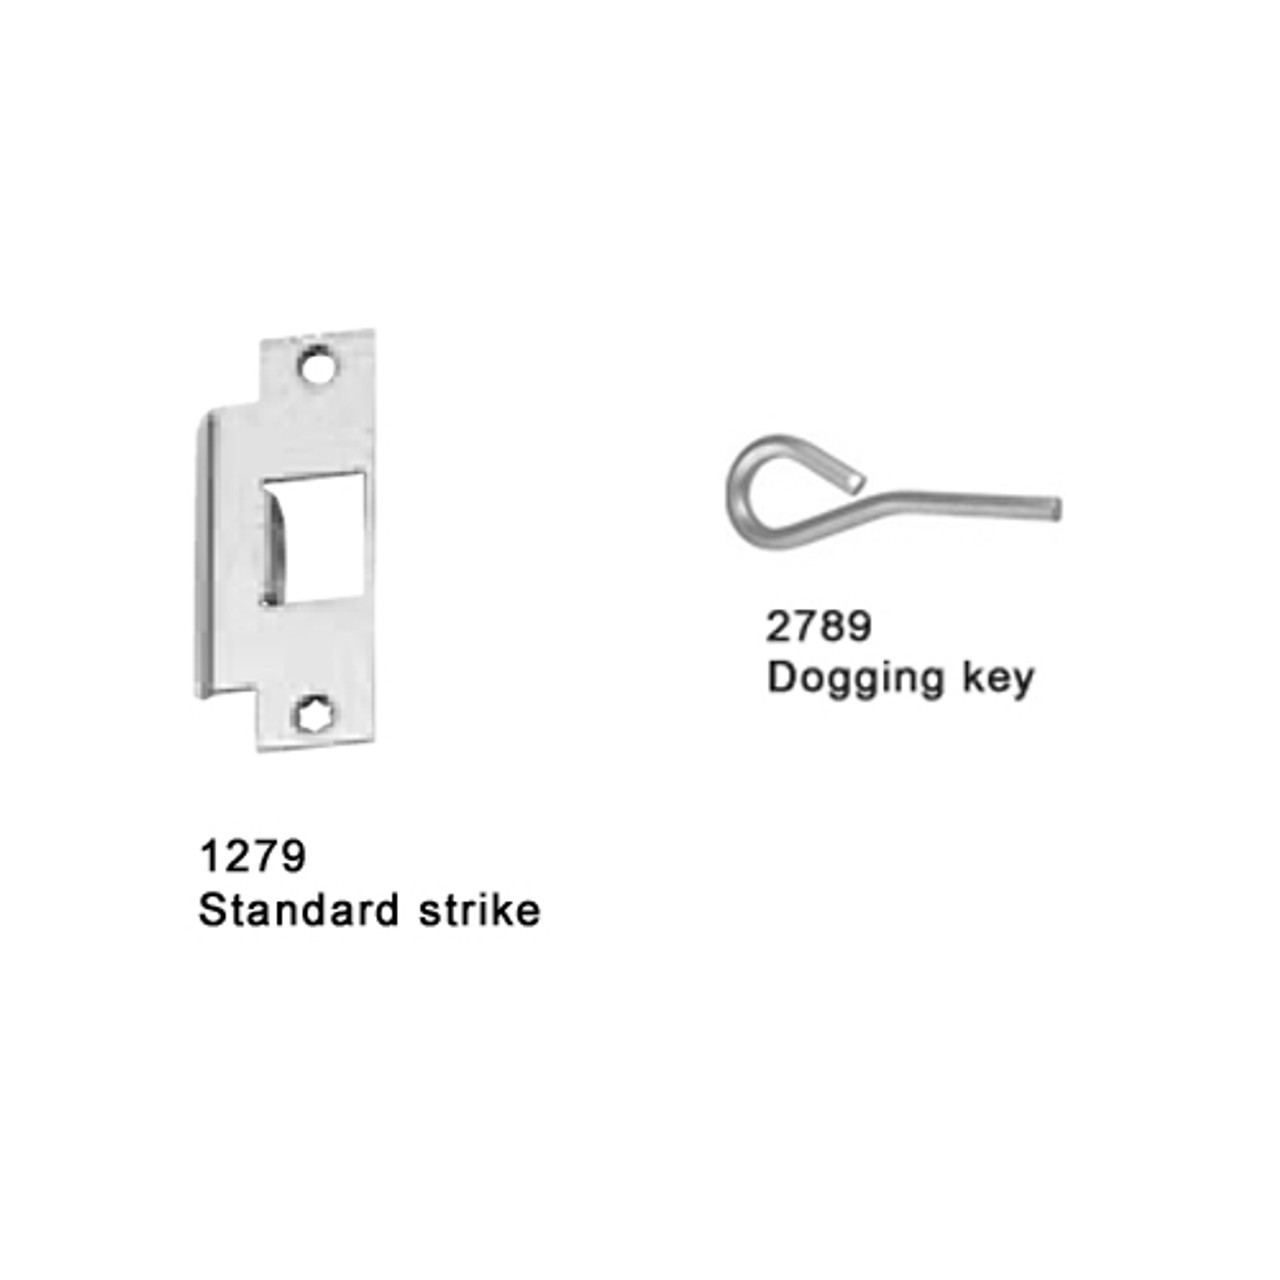 25-M-NL-US15-3-RHR Falcon 25 Series Mortise Lock Devices with 512NL Night Latch Trim in Satin Nickel